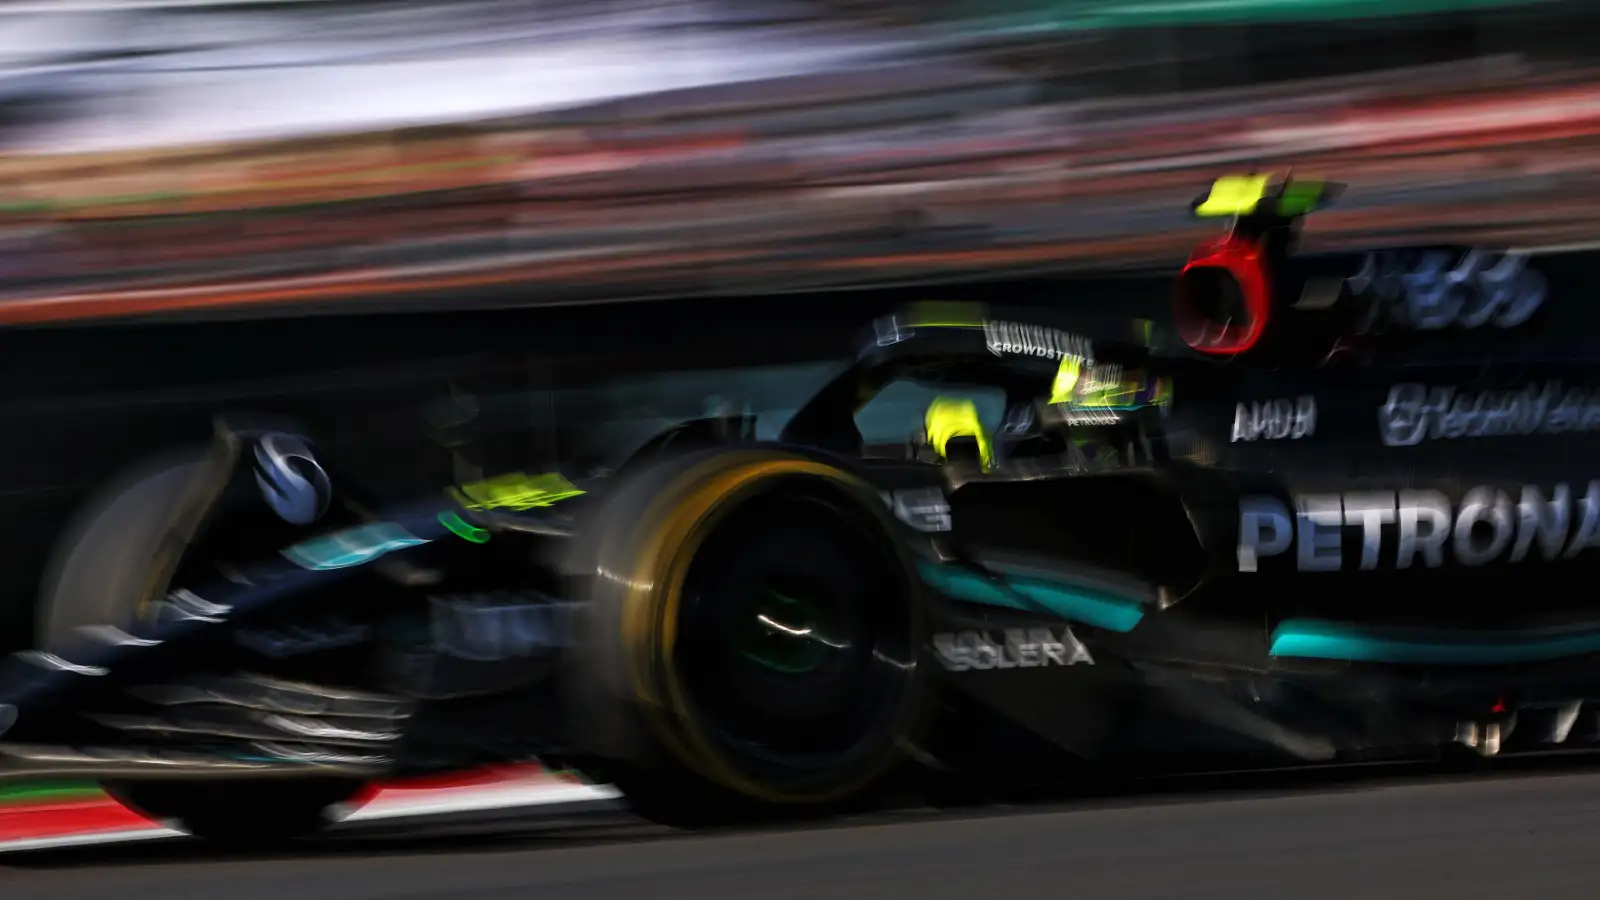 Lewis Hamilton races his Mercedes in a blurry action picture taken during the Mexican Grand Prix.